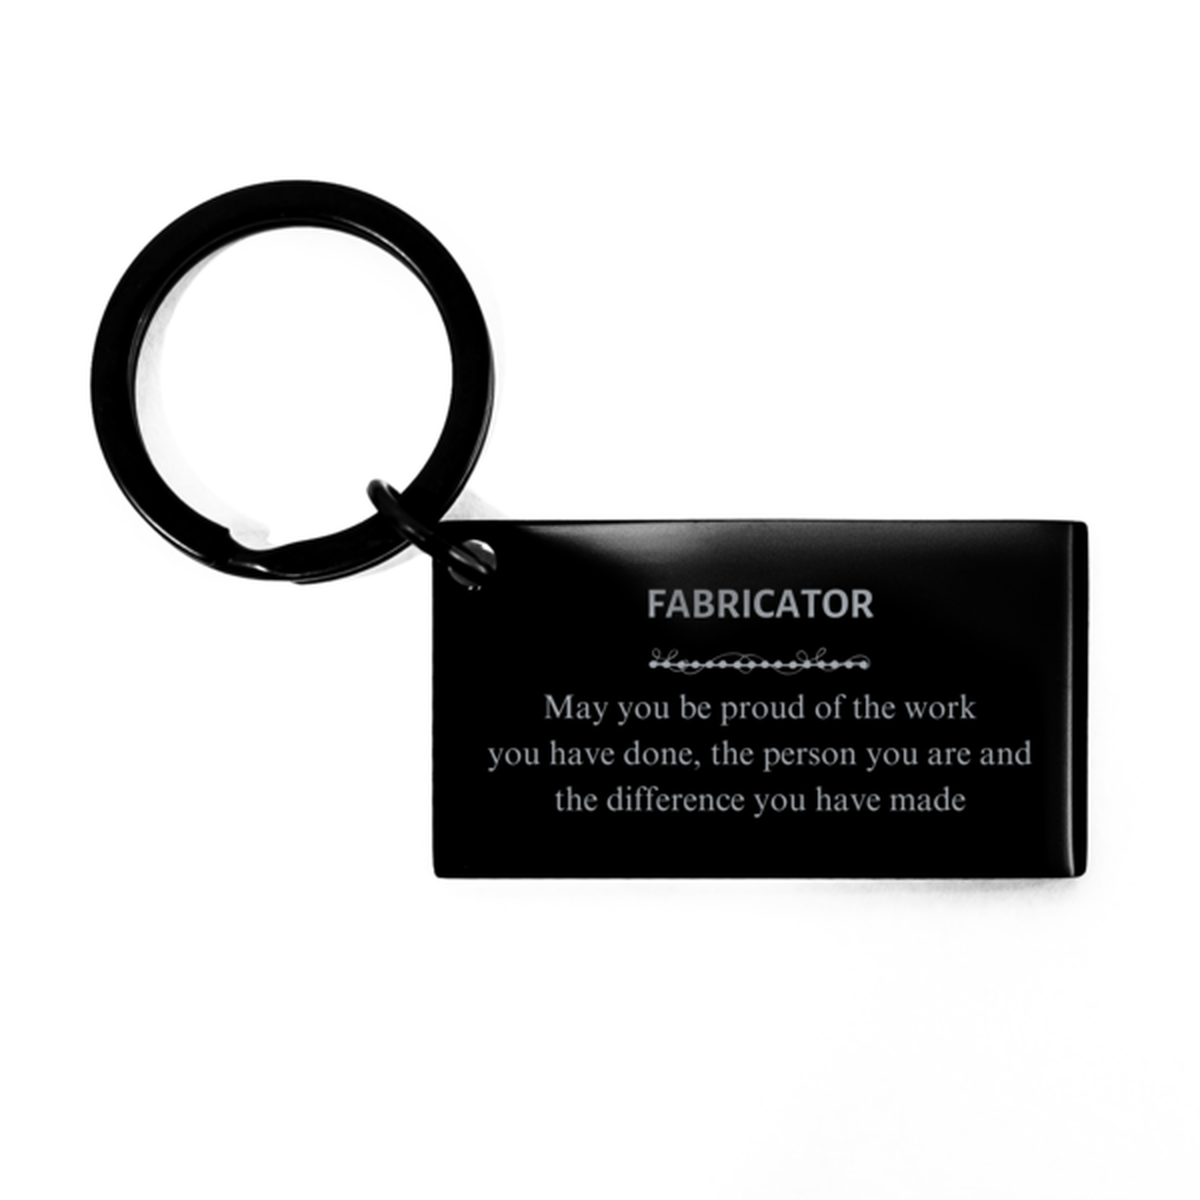 Landscape Architect May you be proud of the work you have done, Retirement Fabricator Keychain for Colleague Appreciation Gifts Amazing for Fabricator